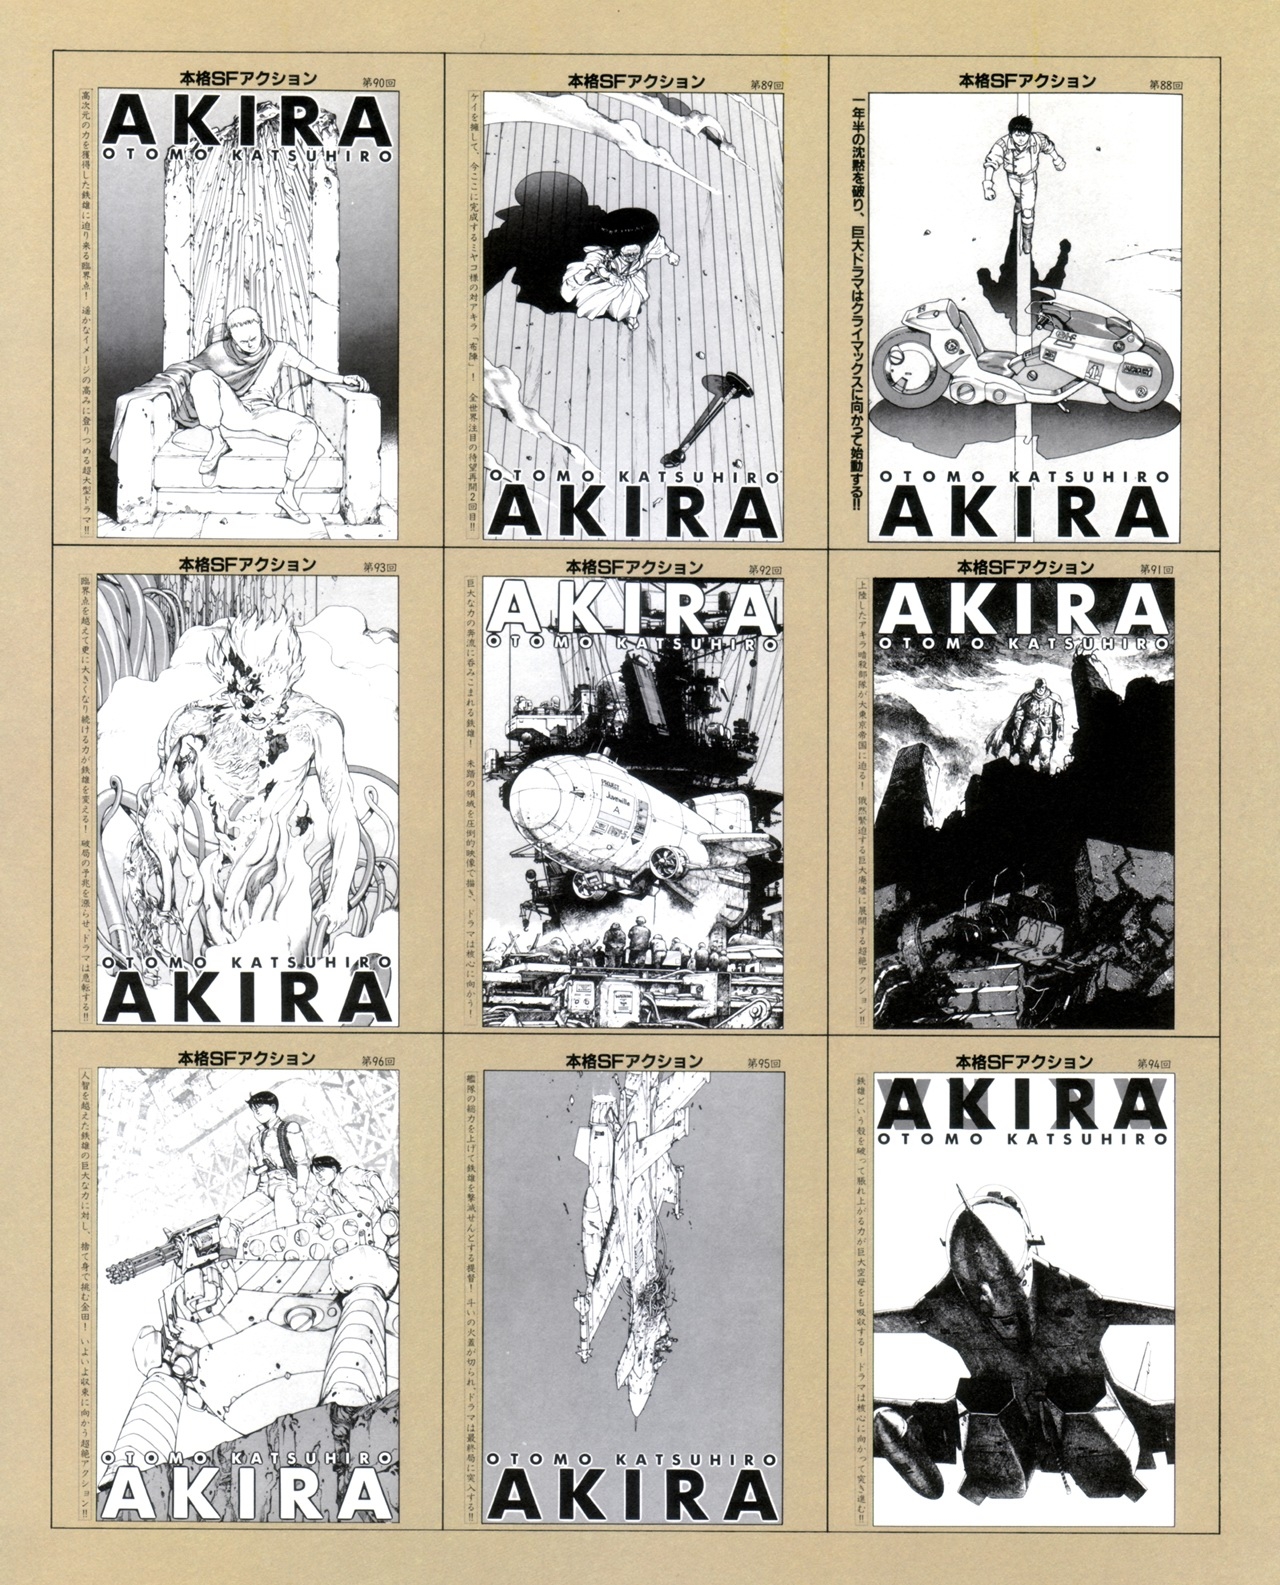 Akira club - The memory of Akira lives on in our hearts! 160